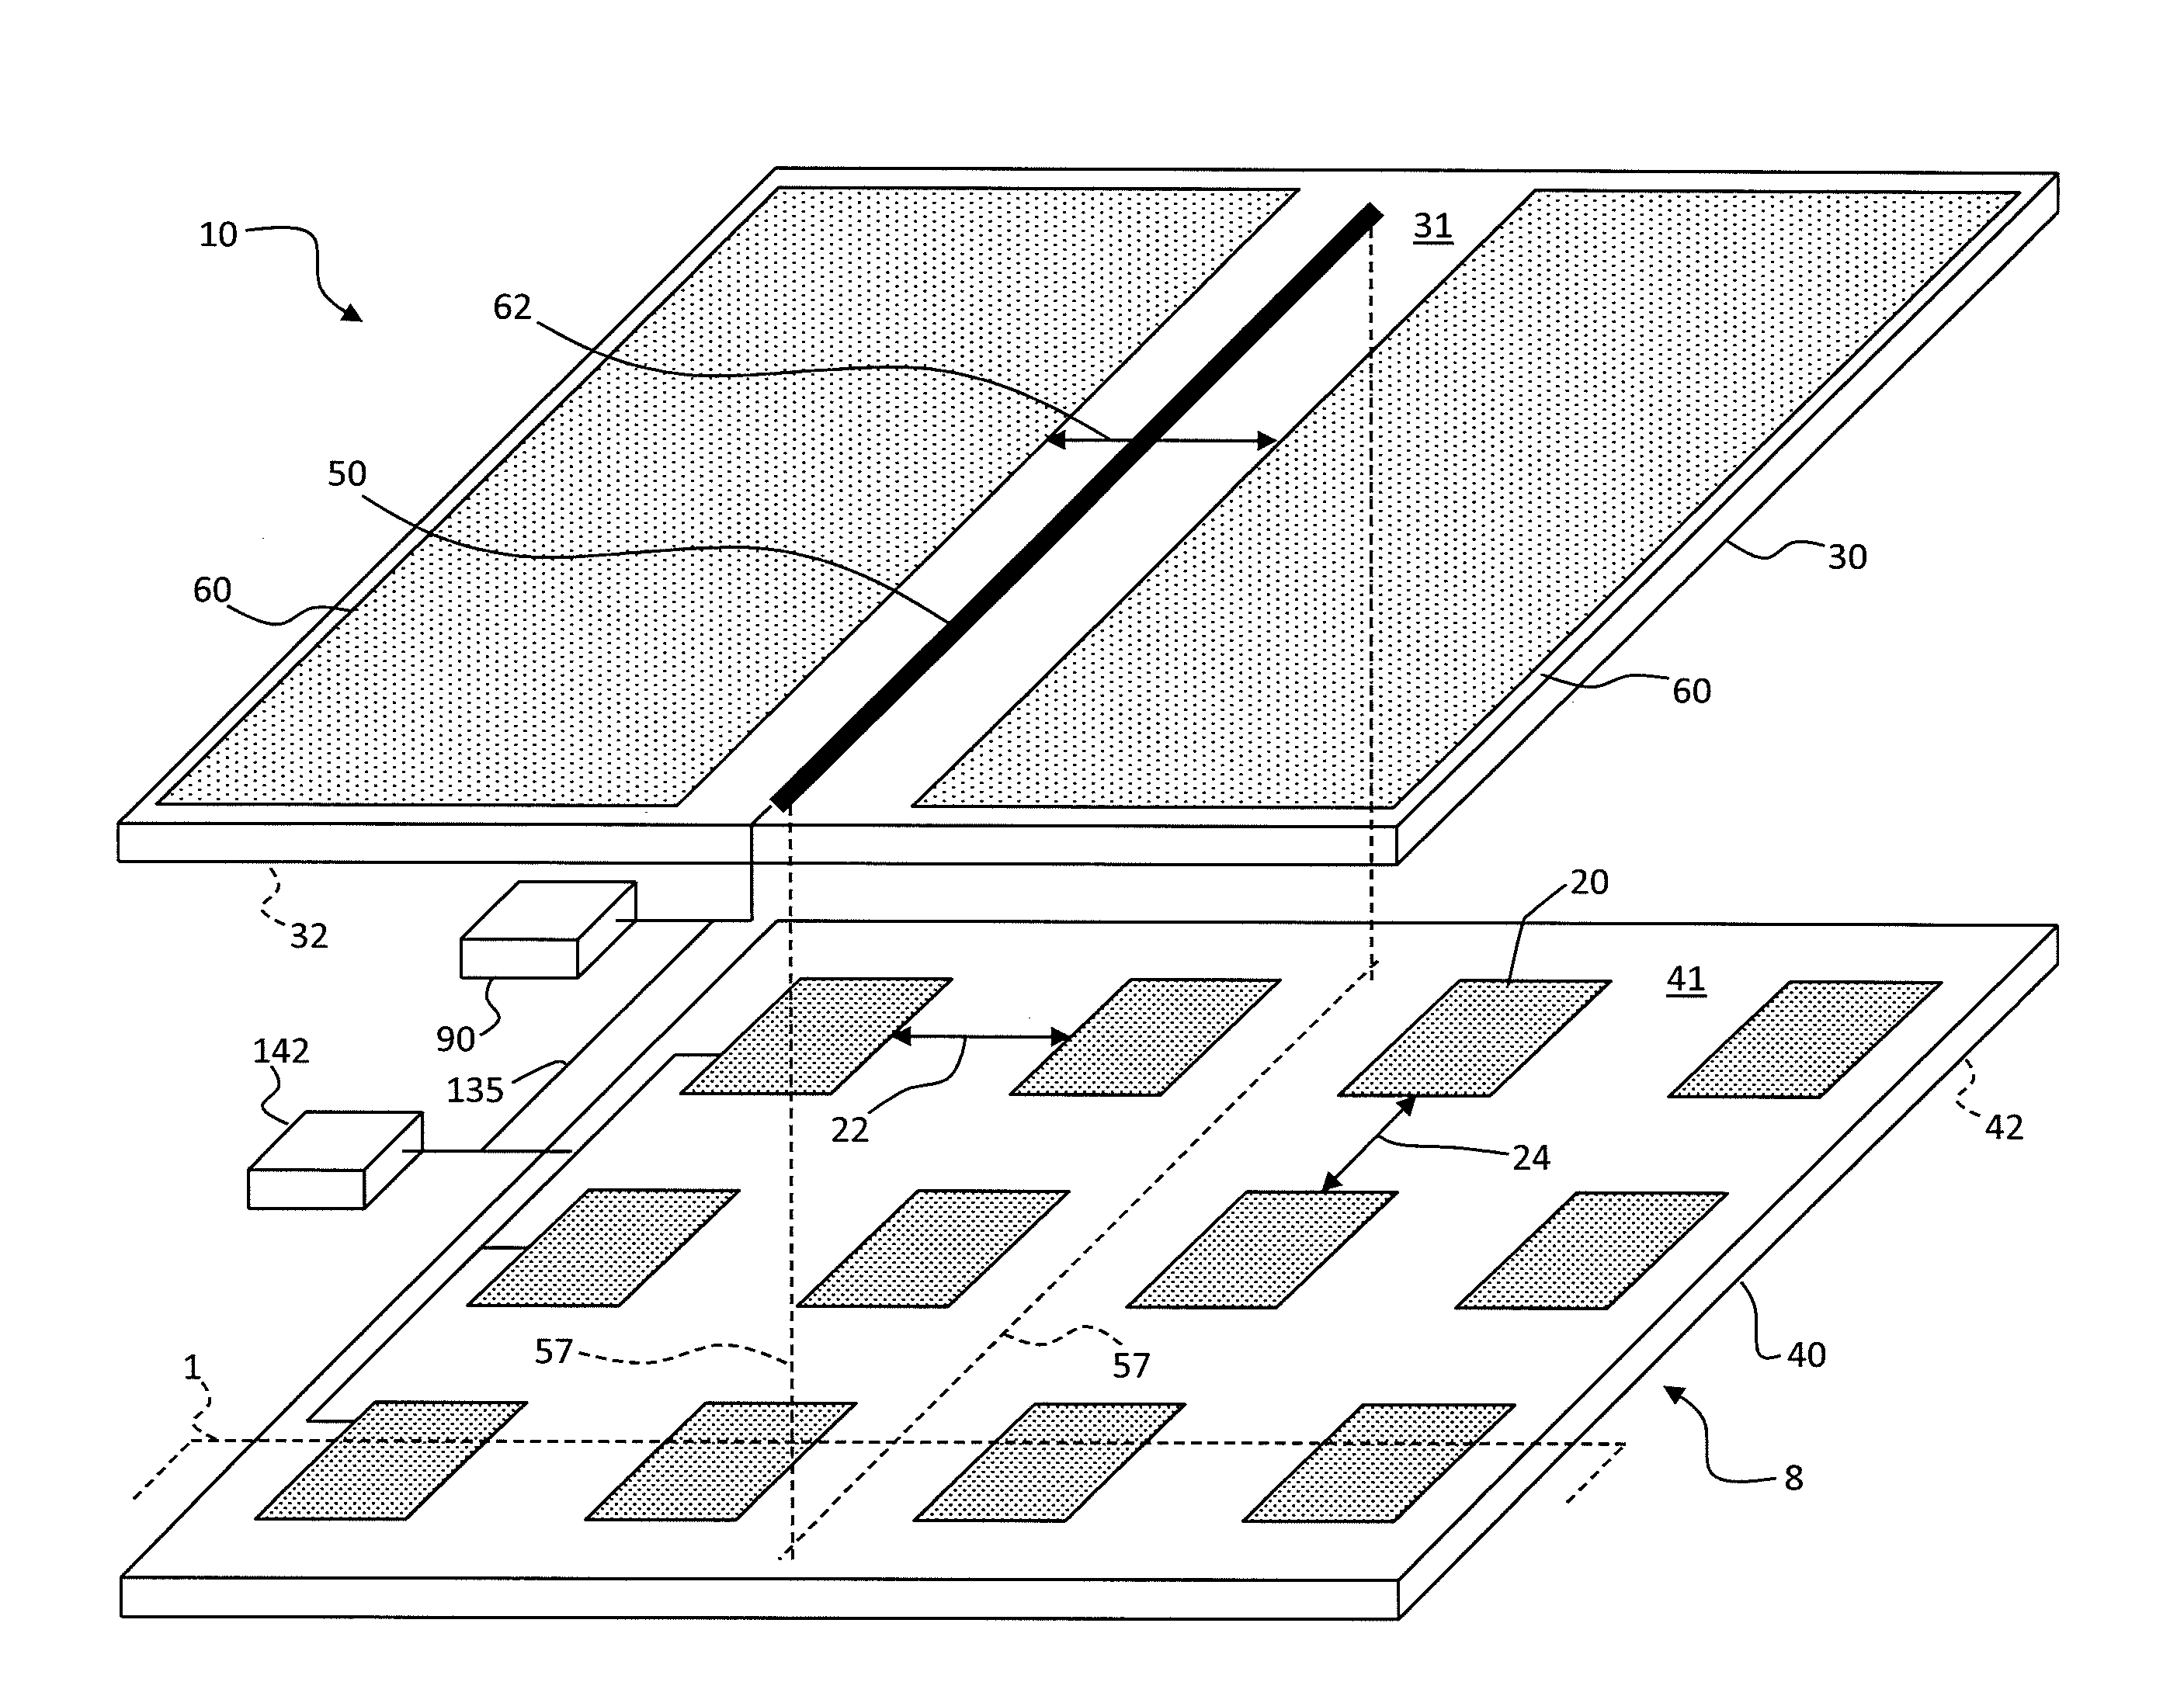 Display apparatus with pixel-aligned ground micro-wire